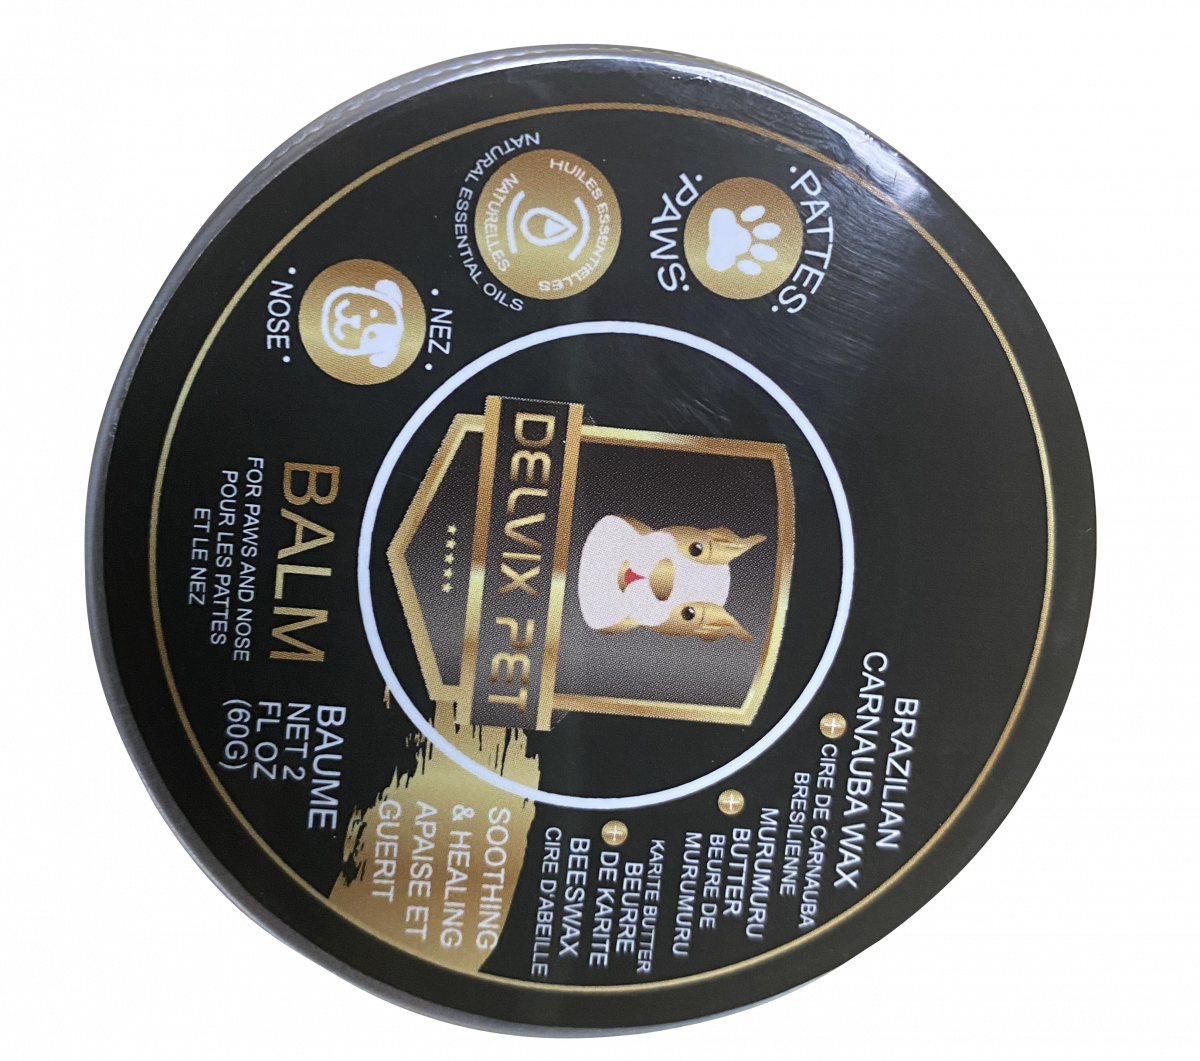 paw balm for dogs